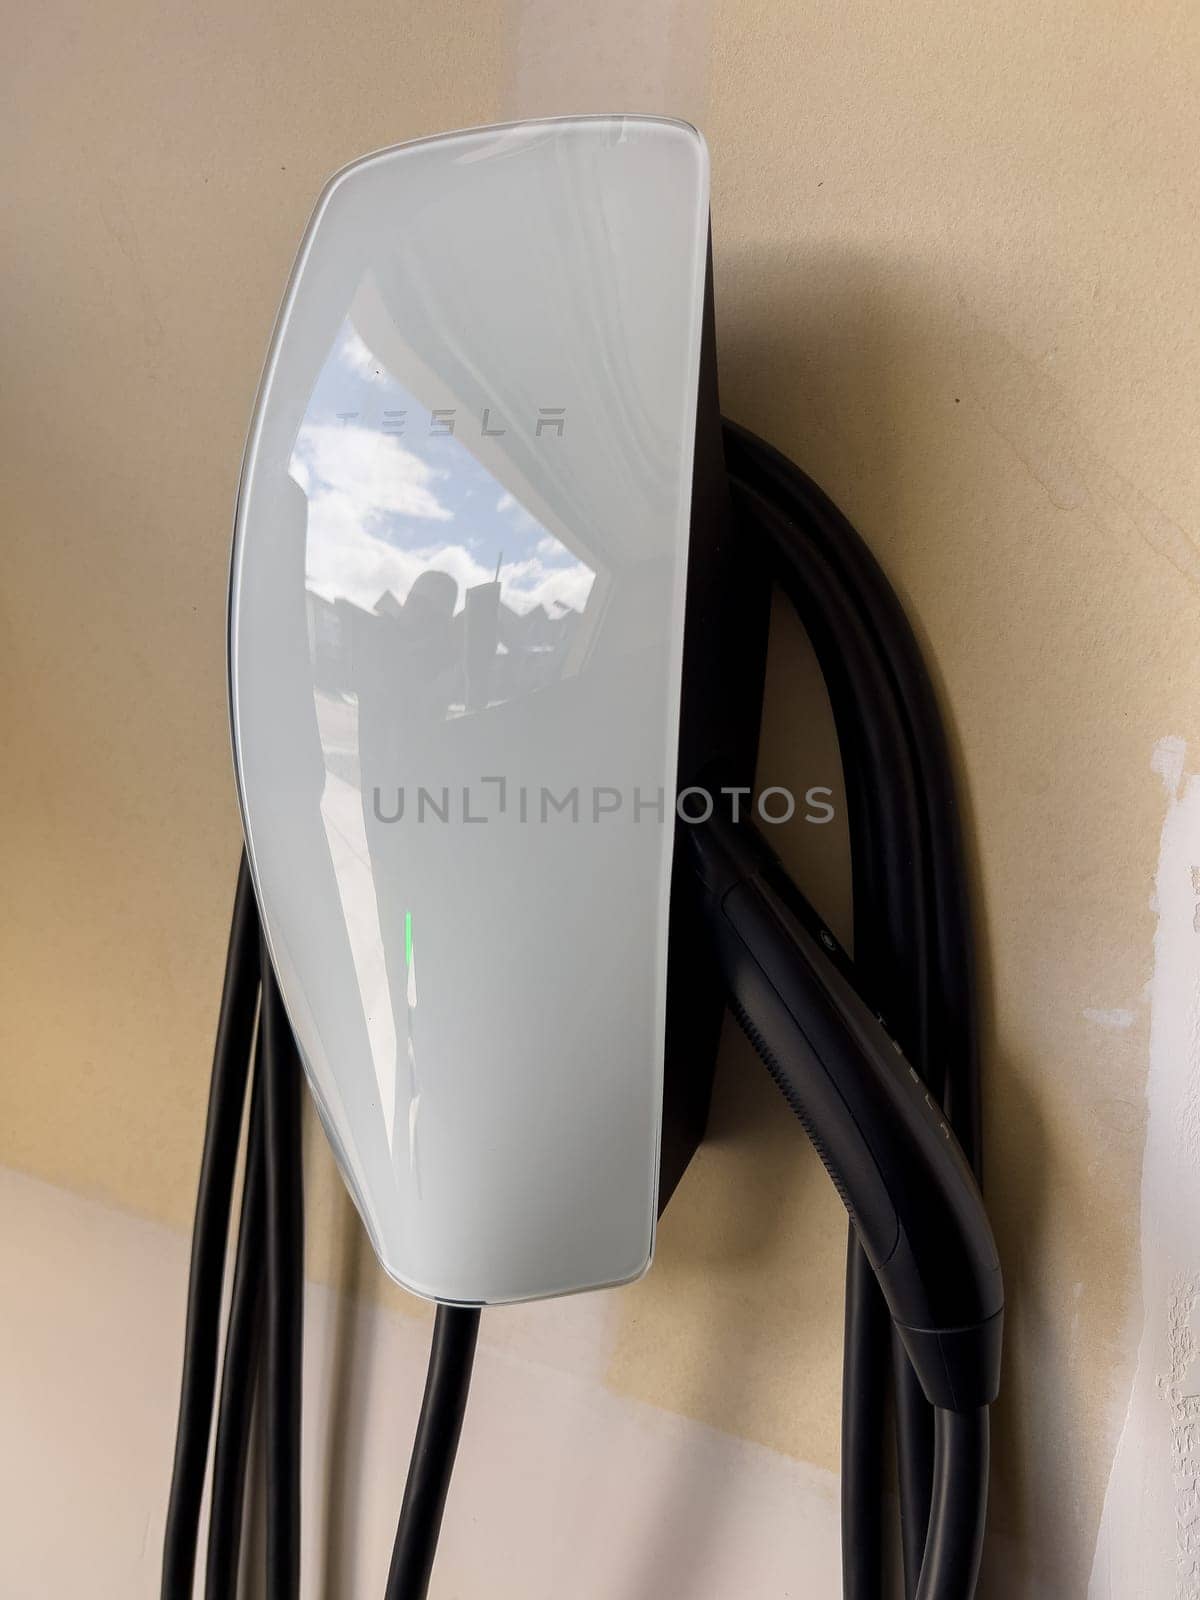 Tesla Wall Connector Installed in a Home Garage for Electric Car Charging by arinahabich